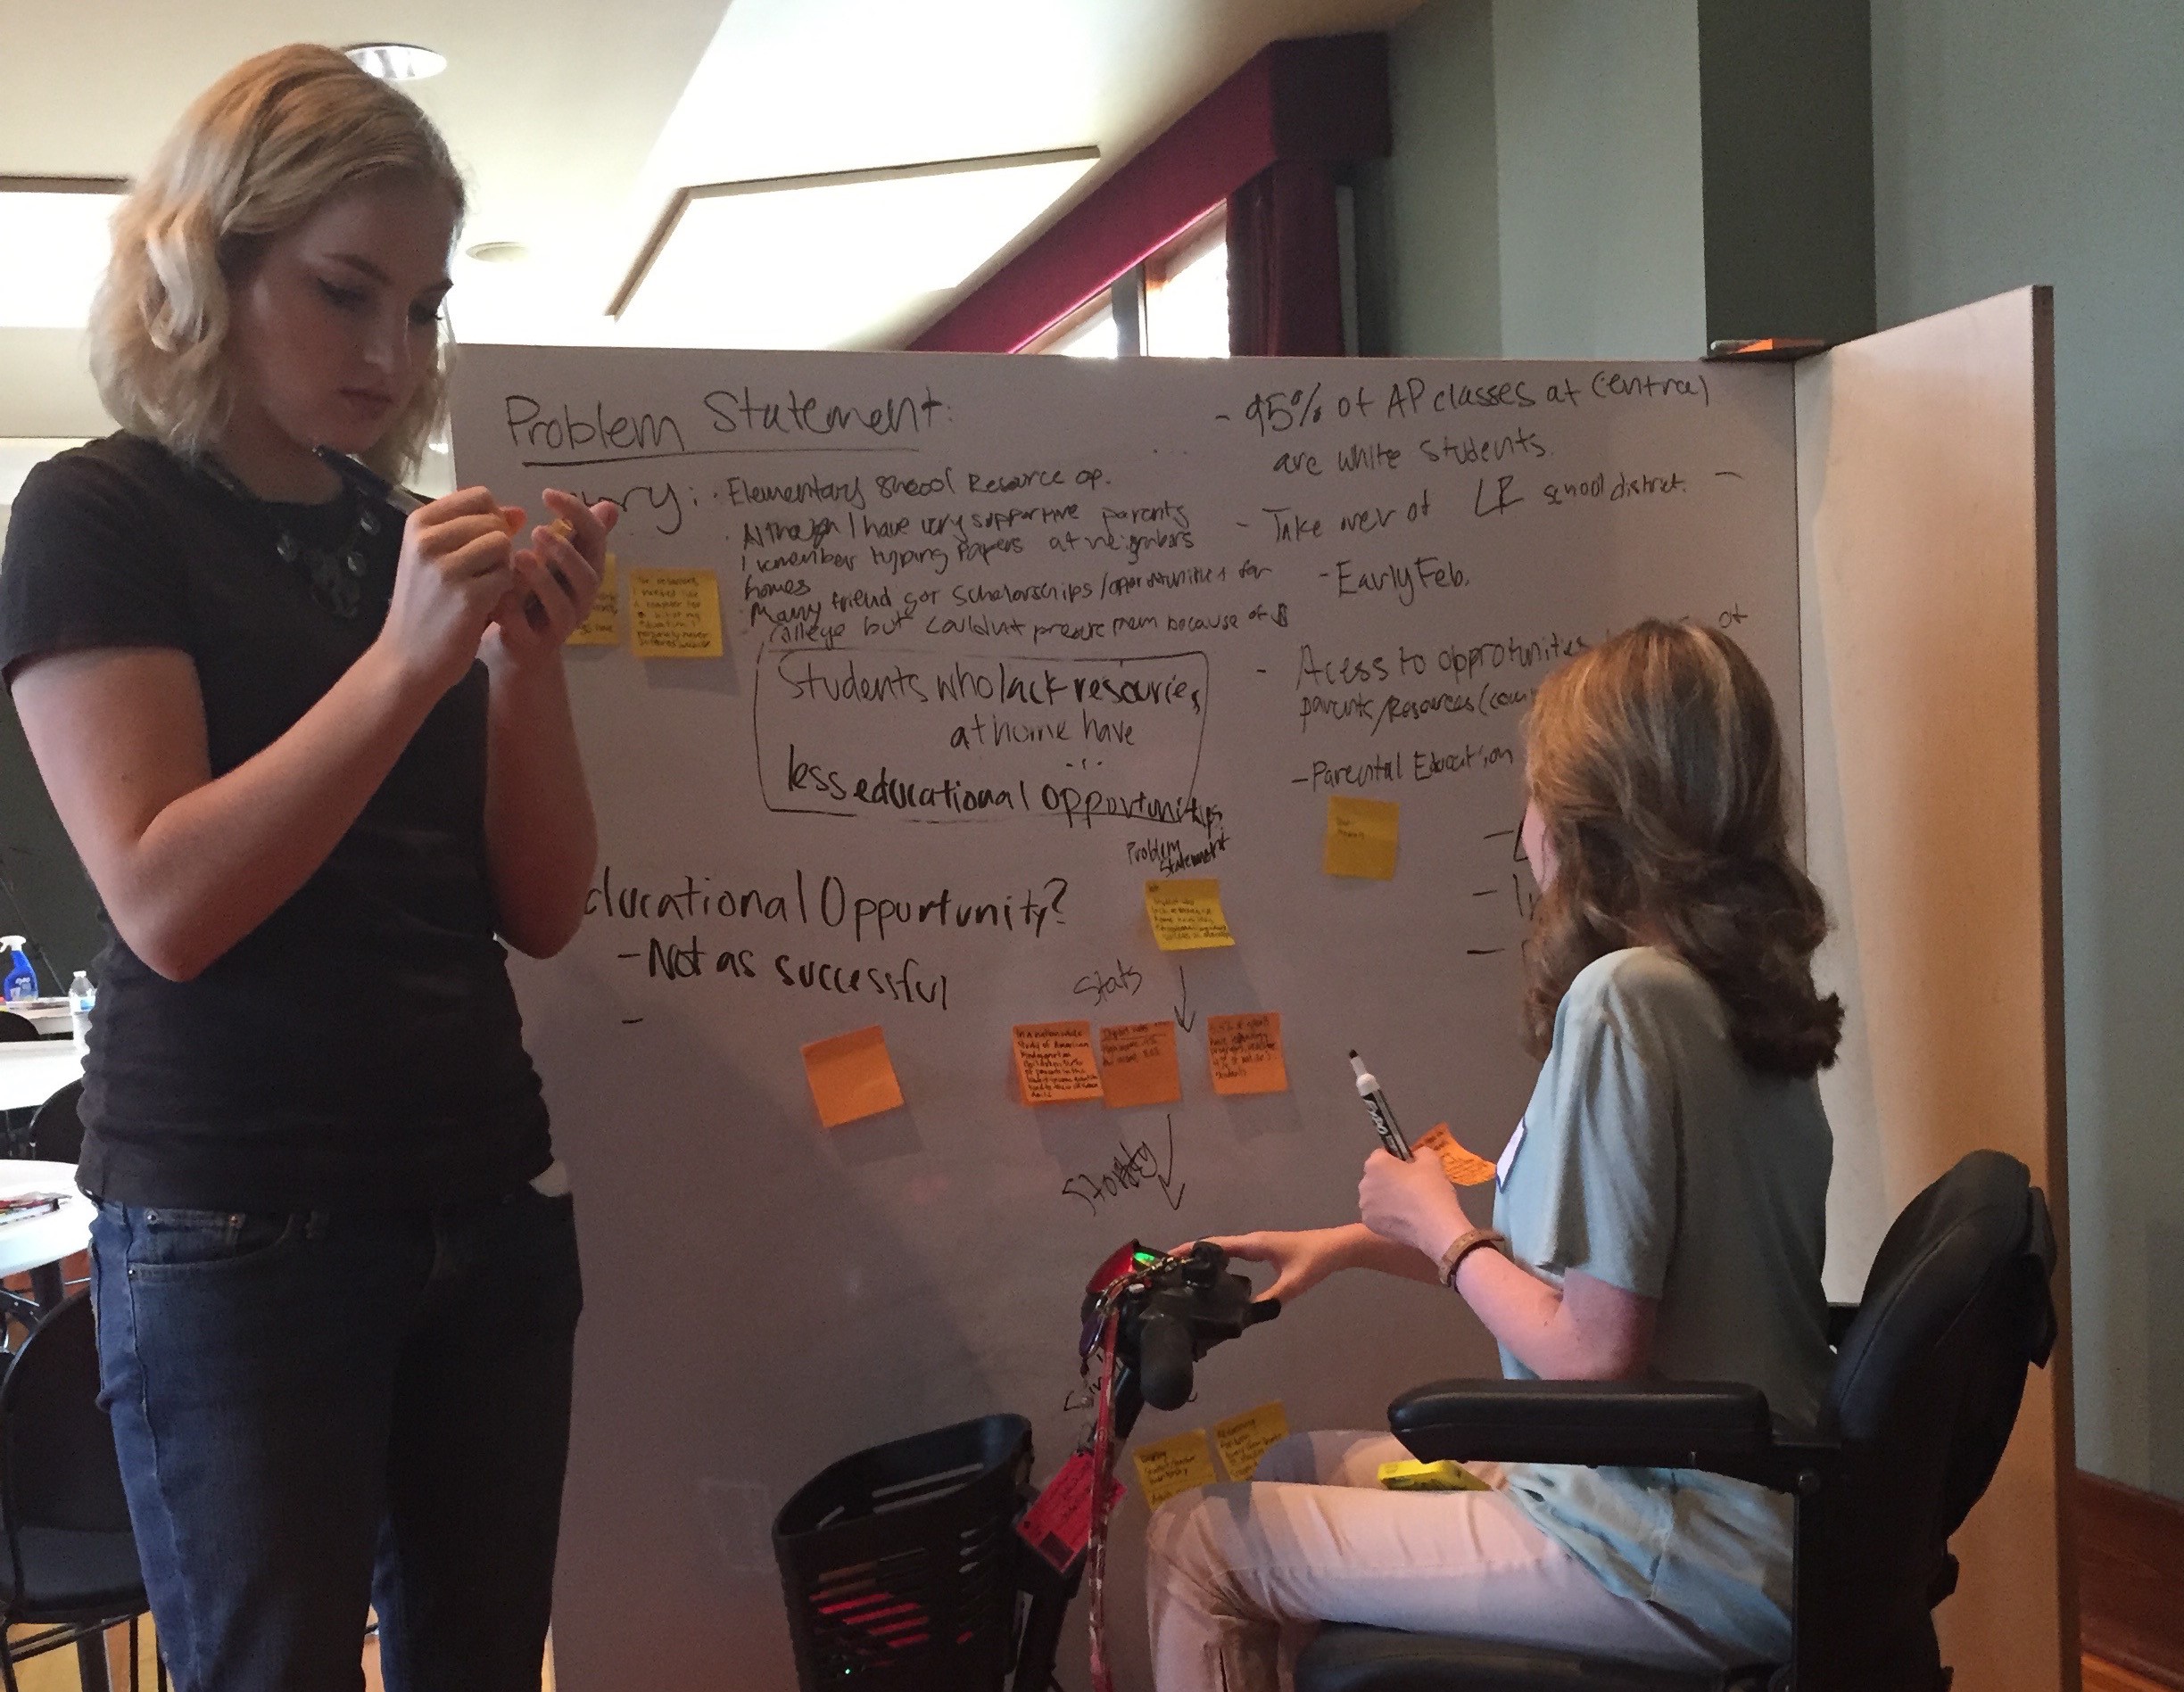 Noble Impact scholars Greta Kresse and Olivia Fitzgibbon white board at an event about challenging the existing opportunity gap in education.